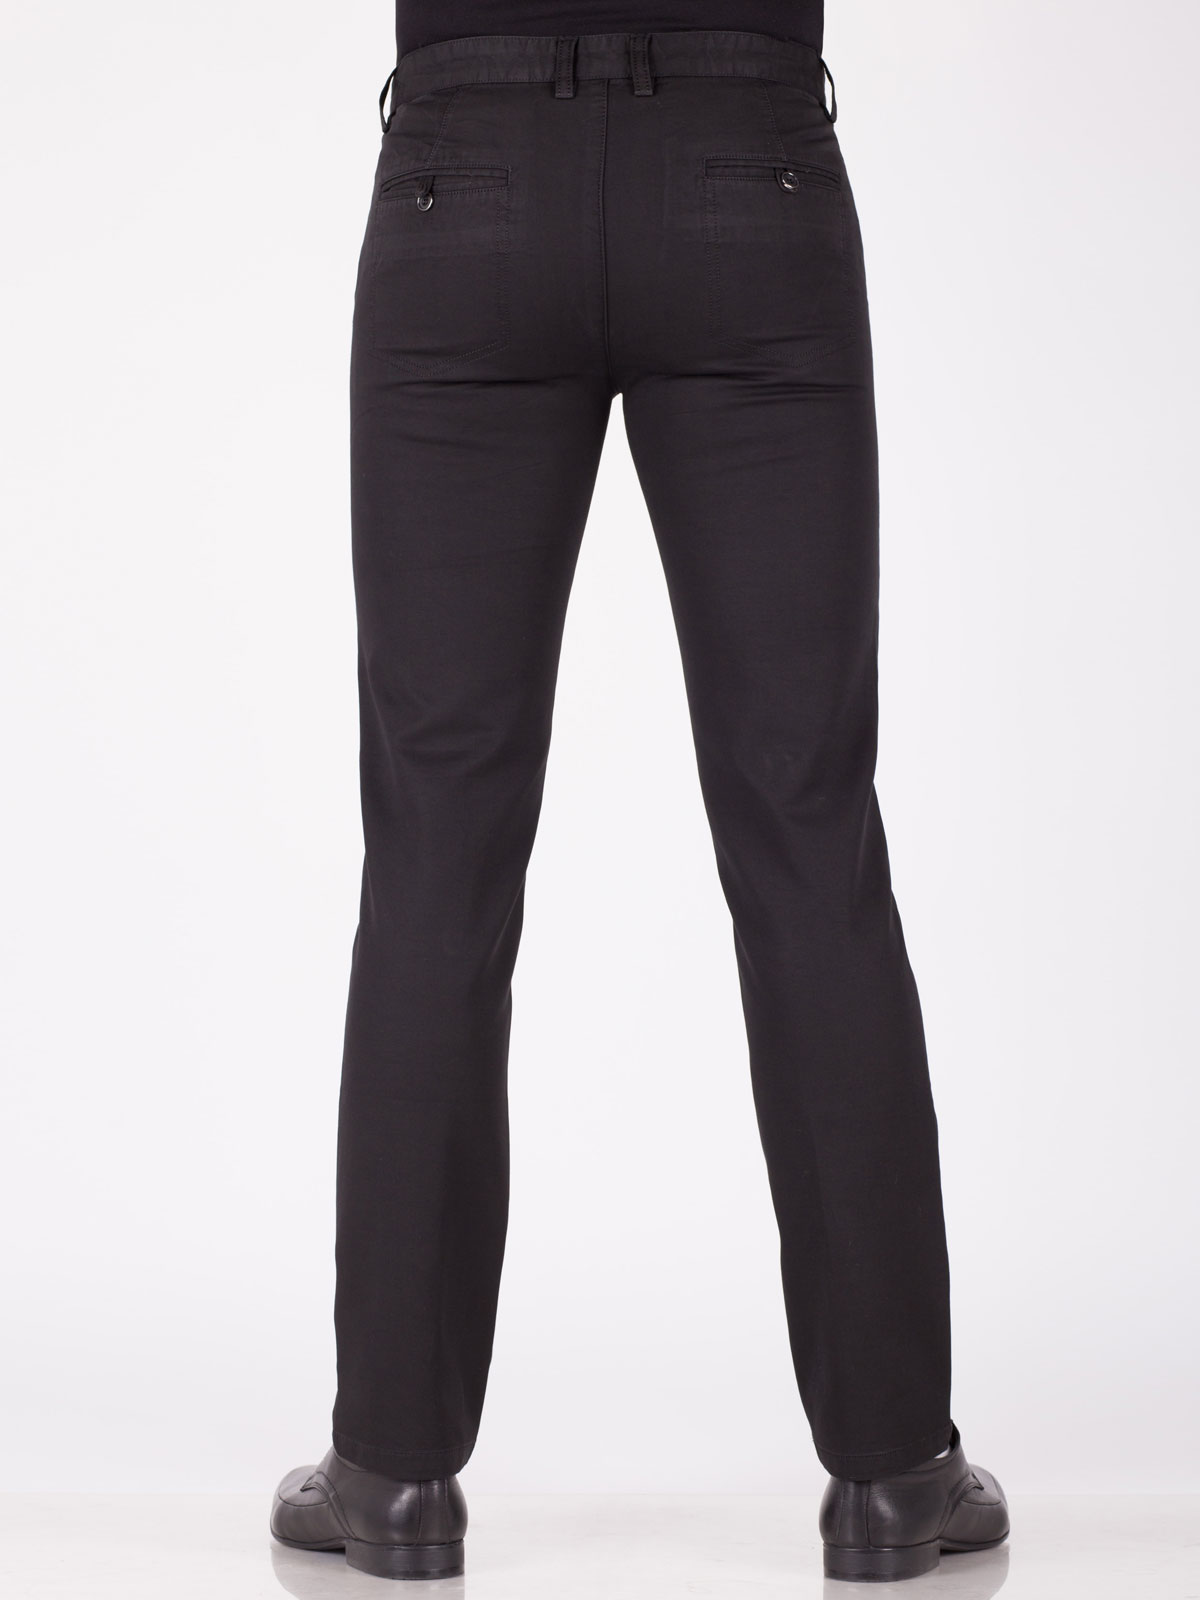 Pants in black cotton and tencel - 60181 € 11.25 img2